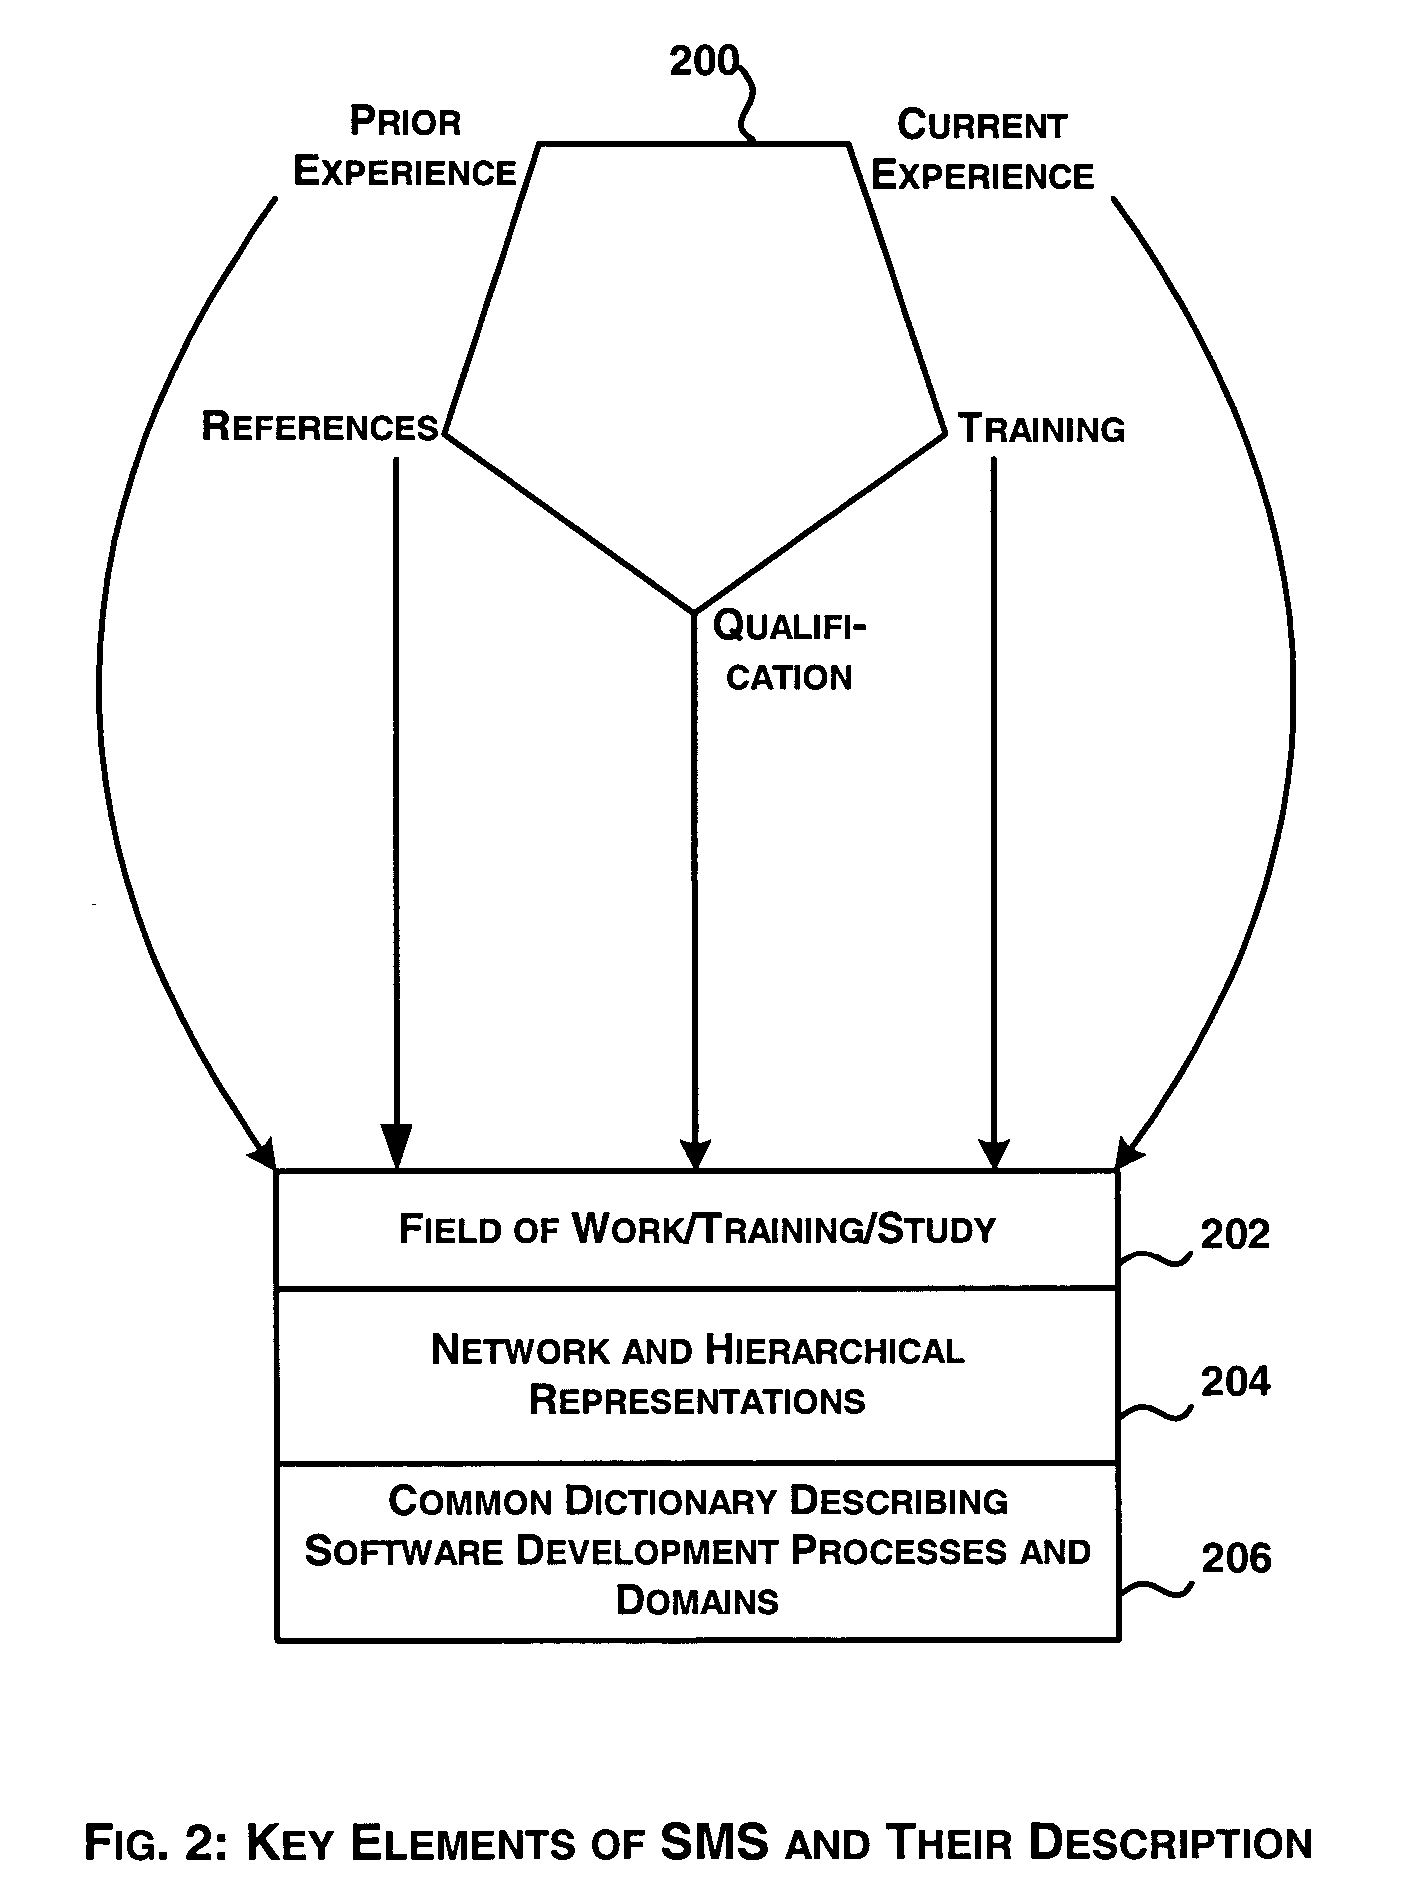 System and method for skill managememt of knowledge workers in a software industry